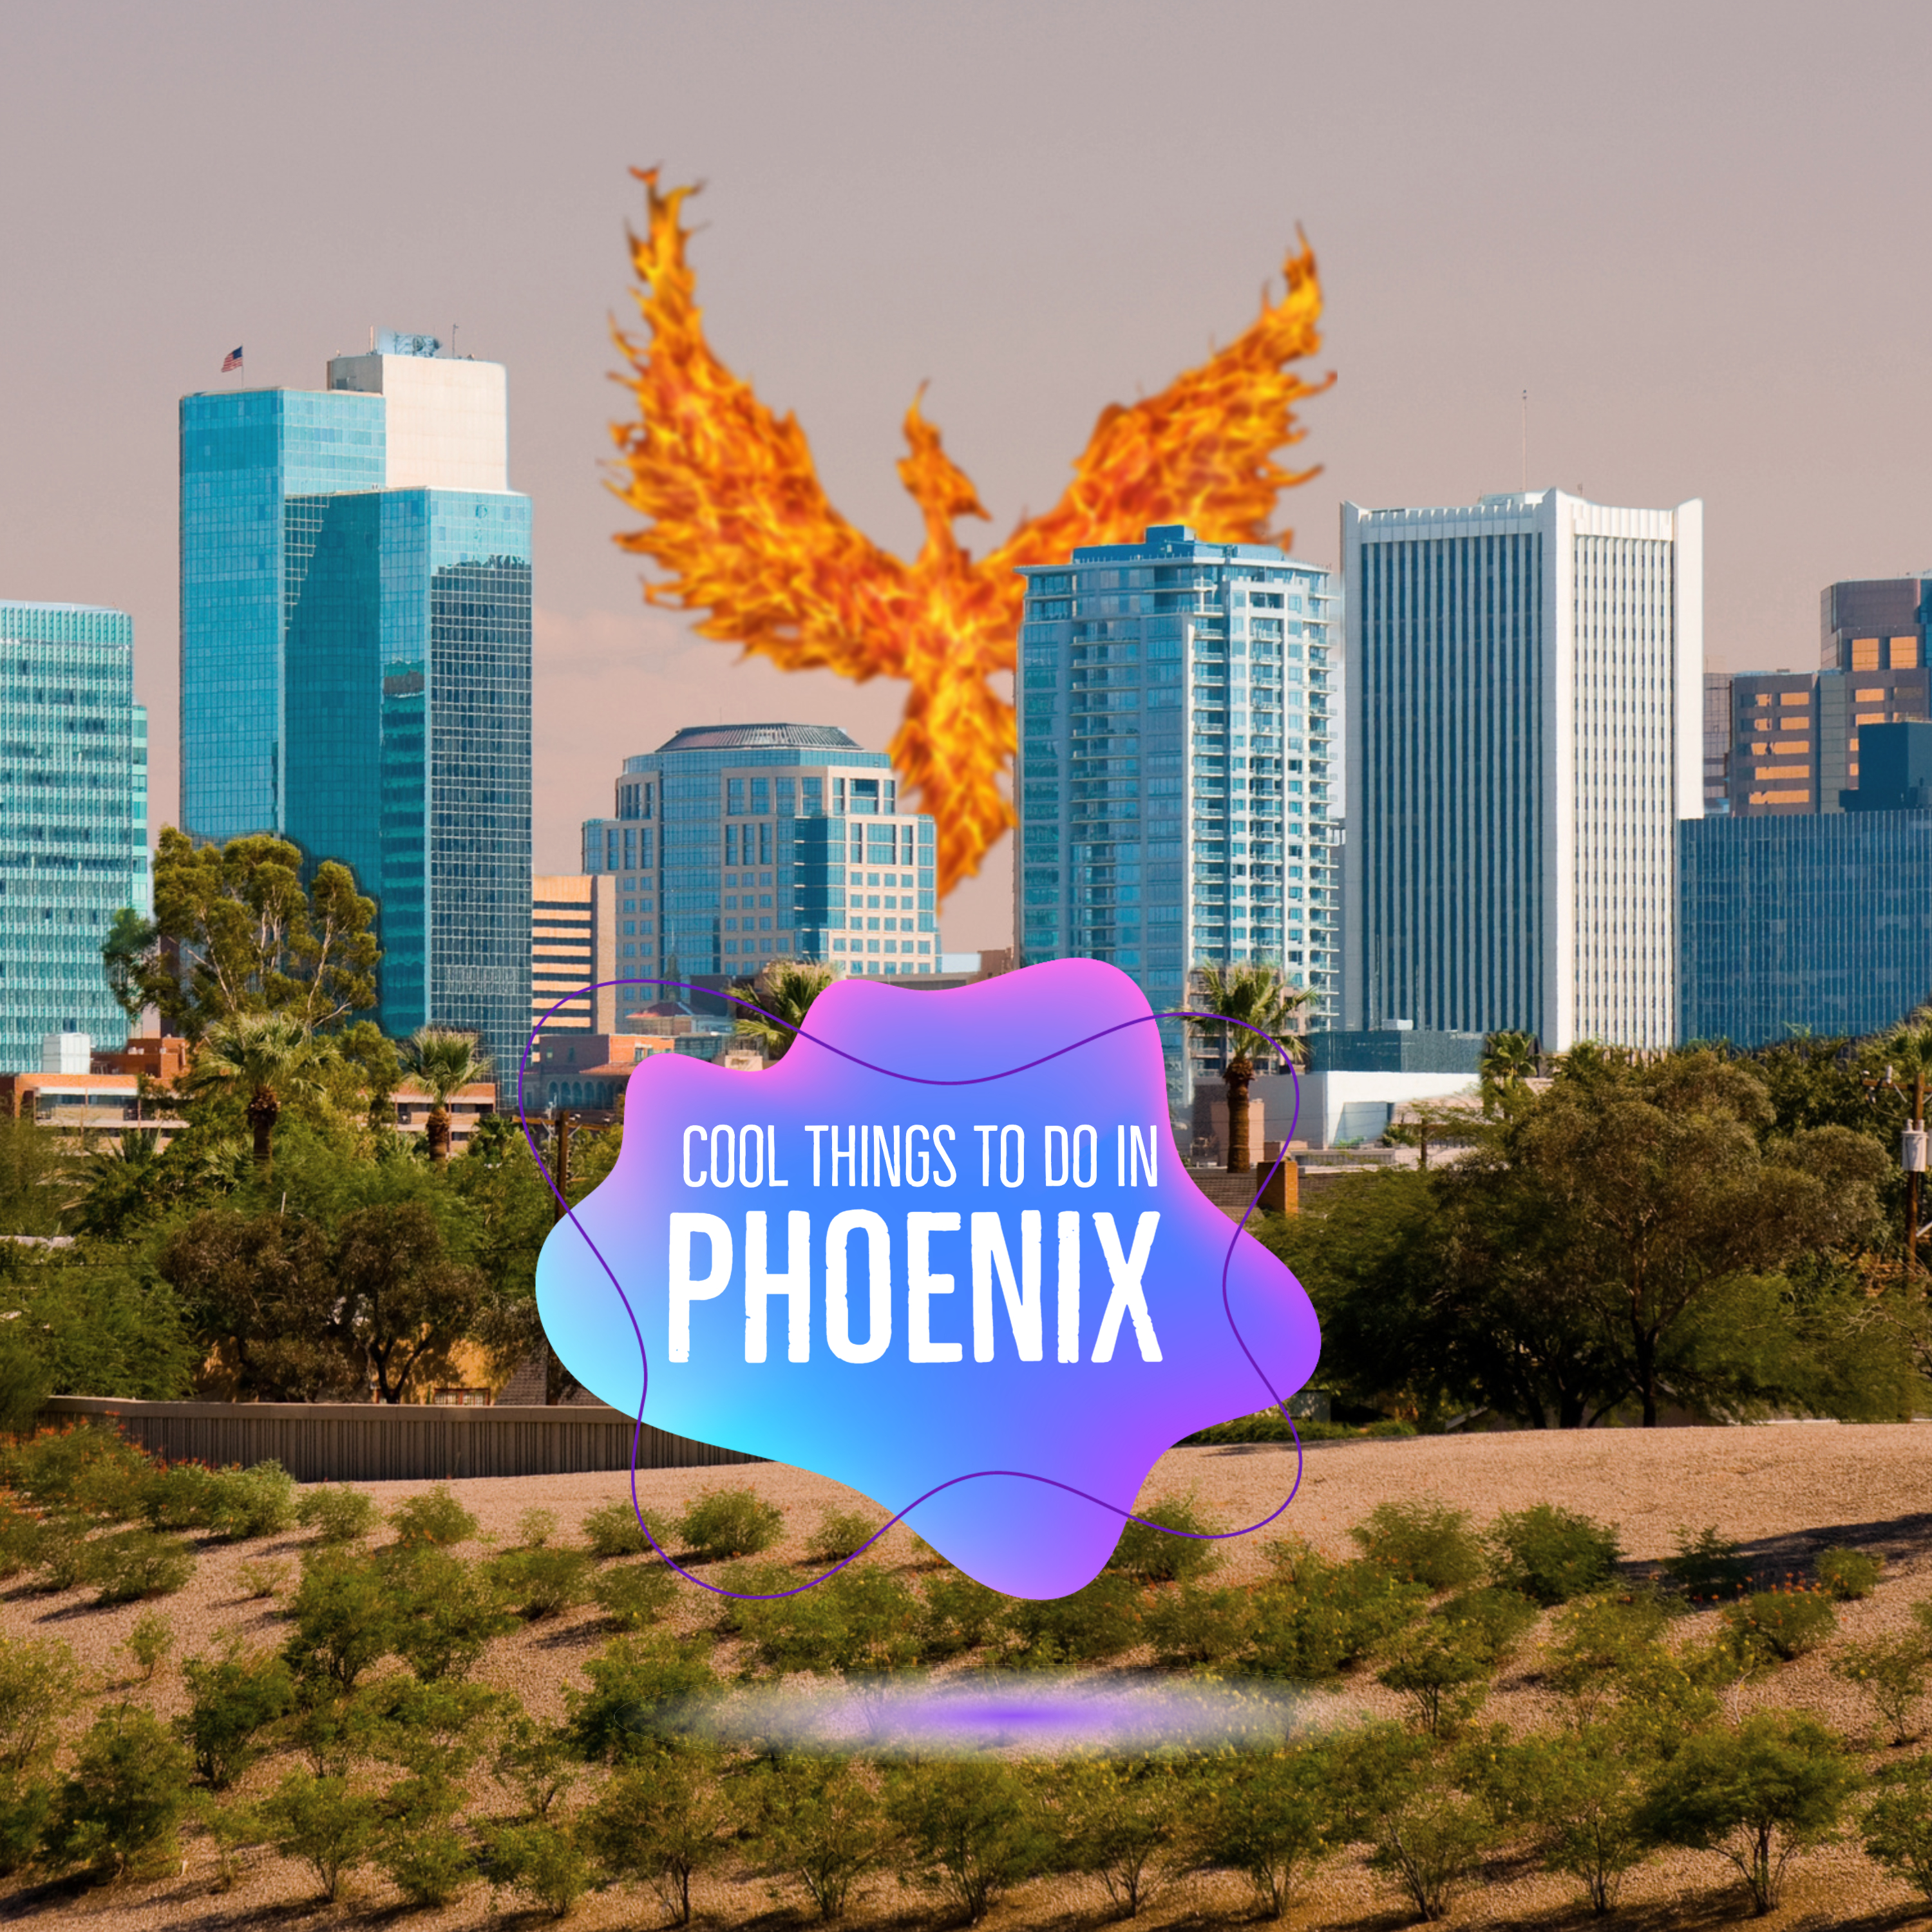 Are you in Phoenix this Summer? Finding cool stuff to do despite the heat!